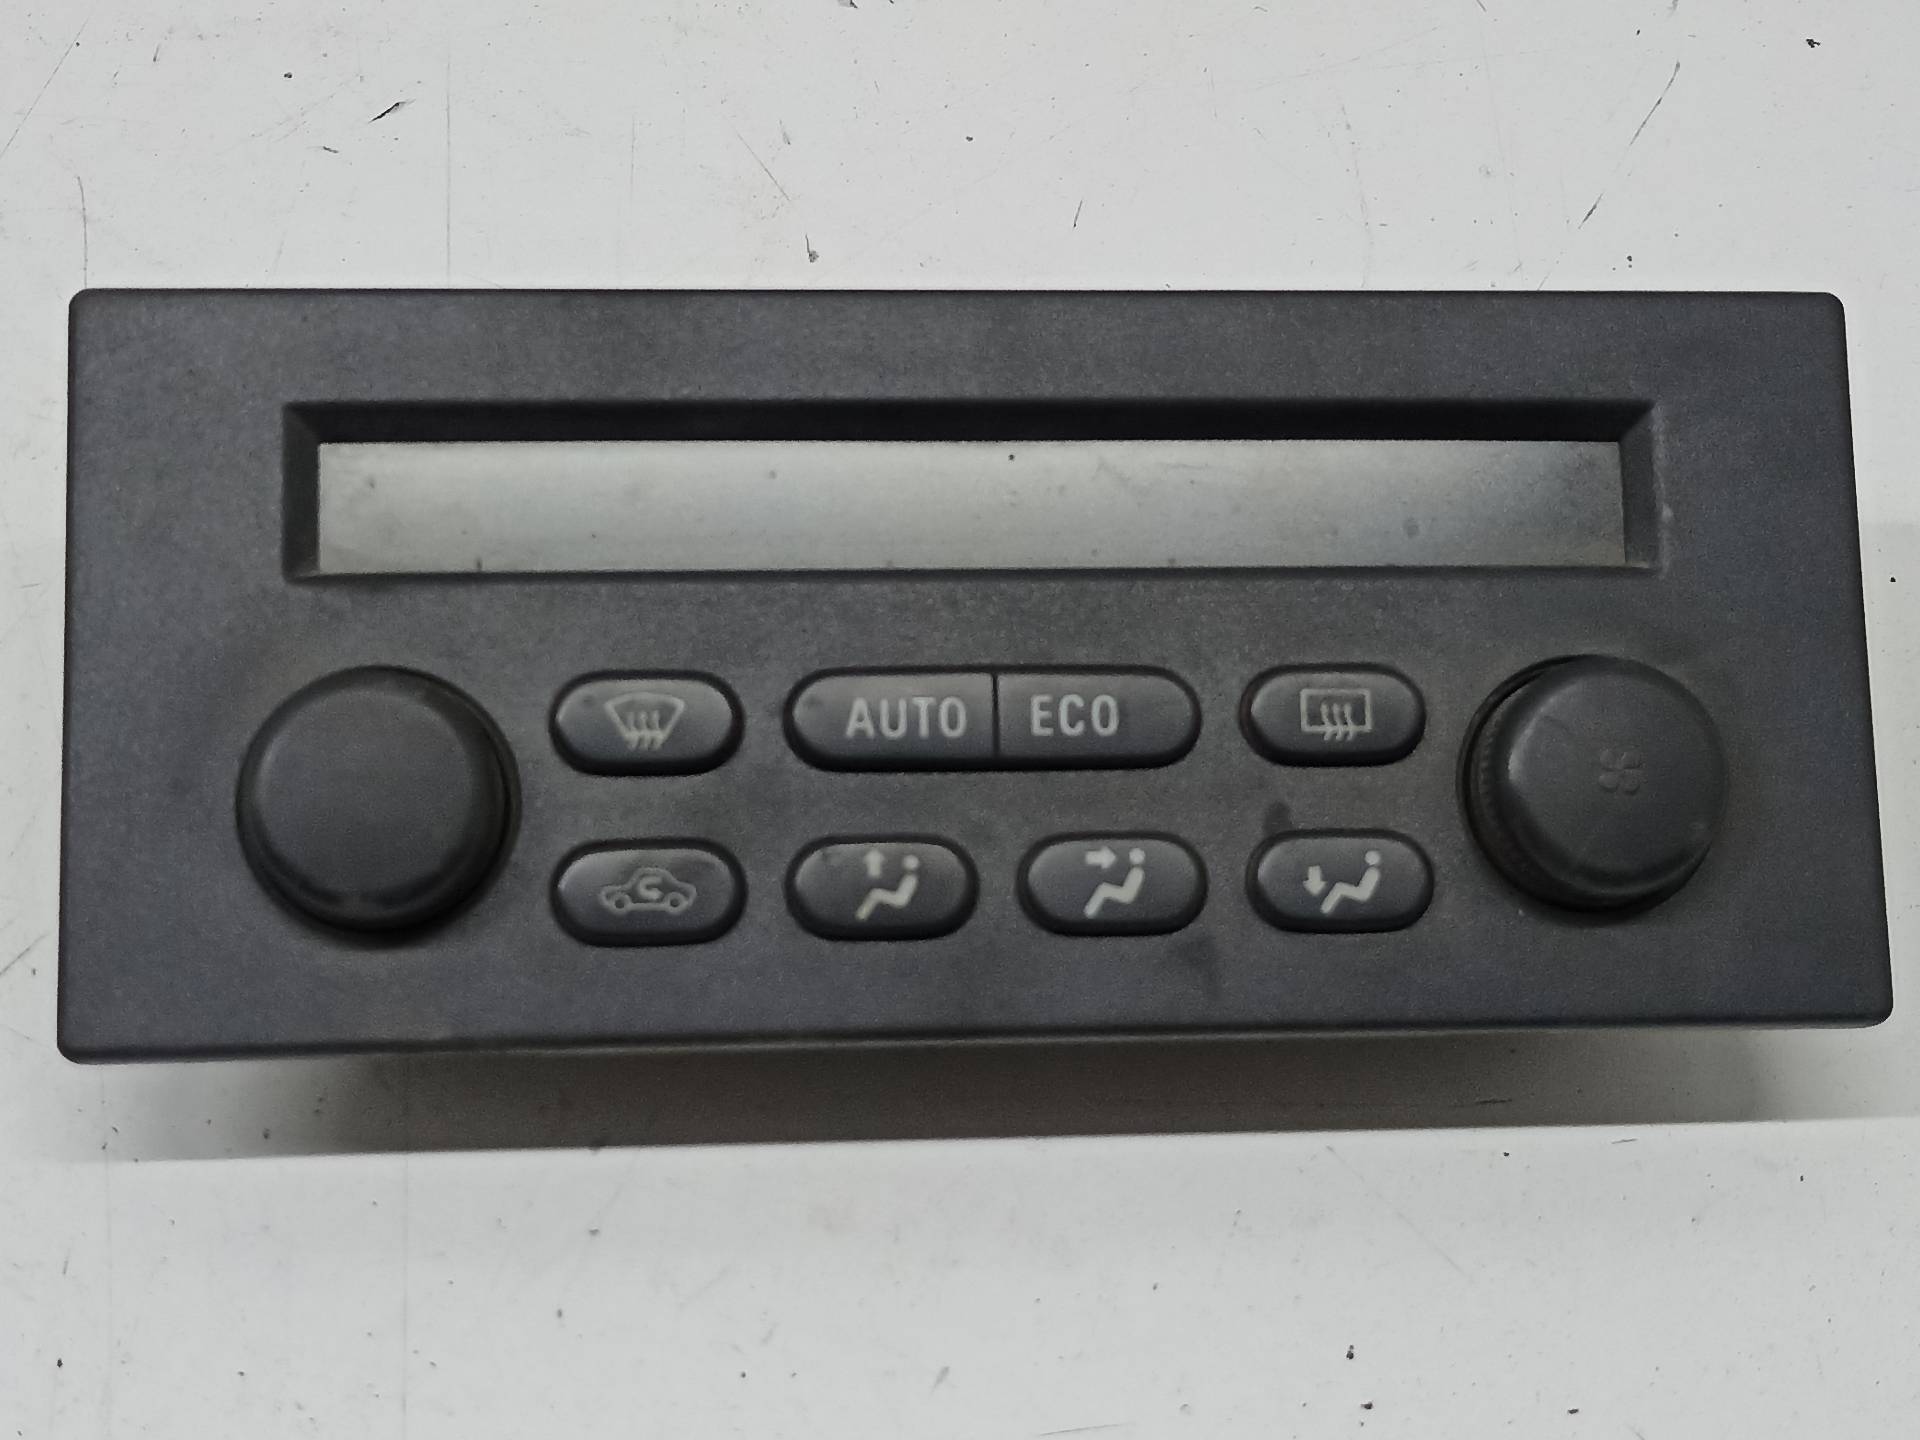 OPEL Astra H (2004-2014) Climate  Control Unit 024442472, 226153449175, 175 24310941